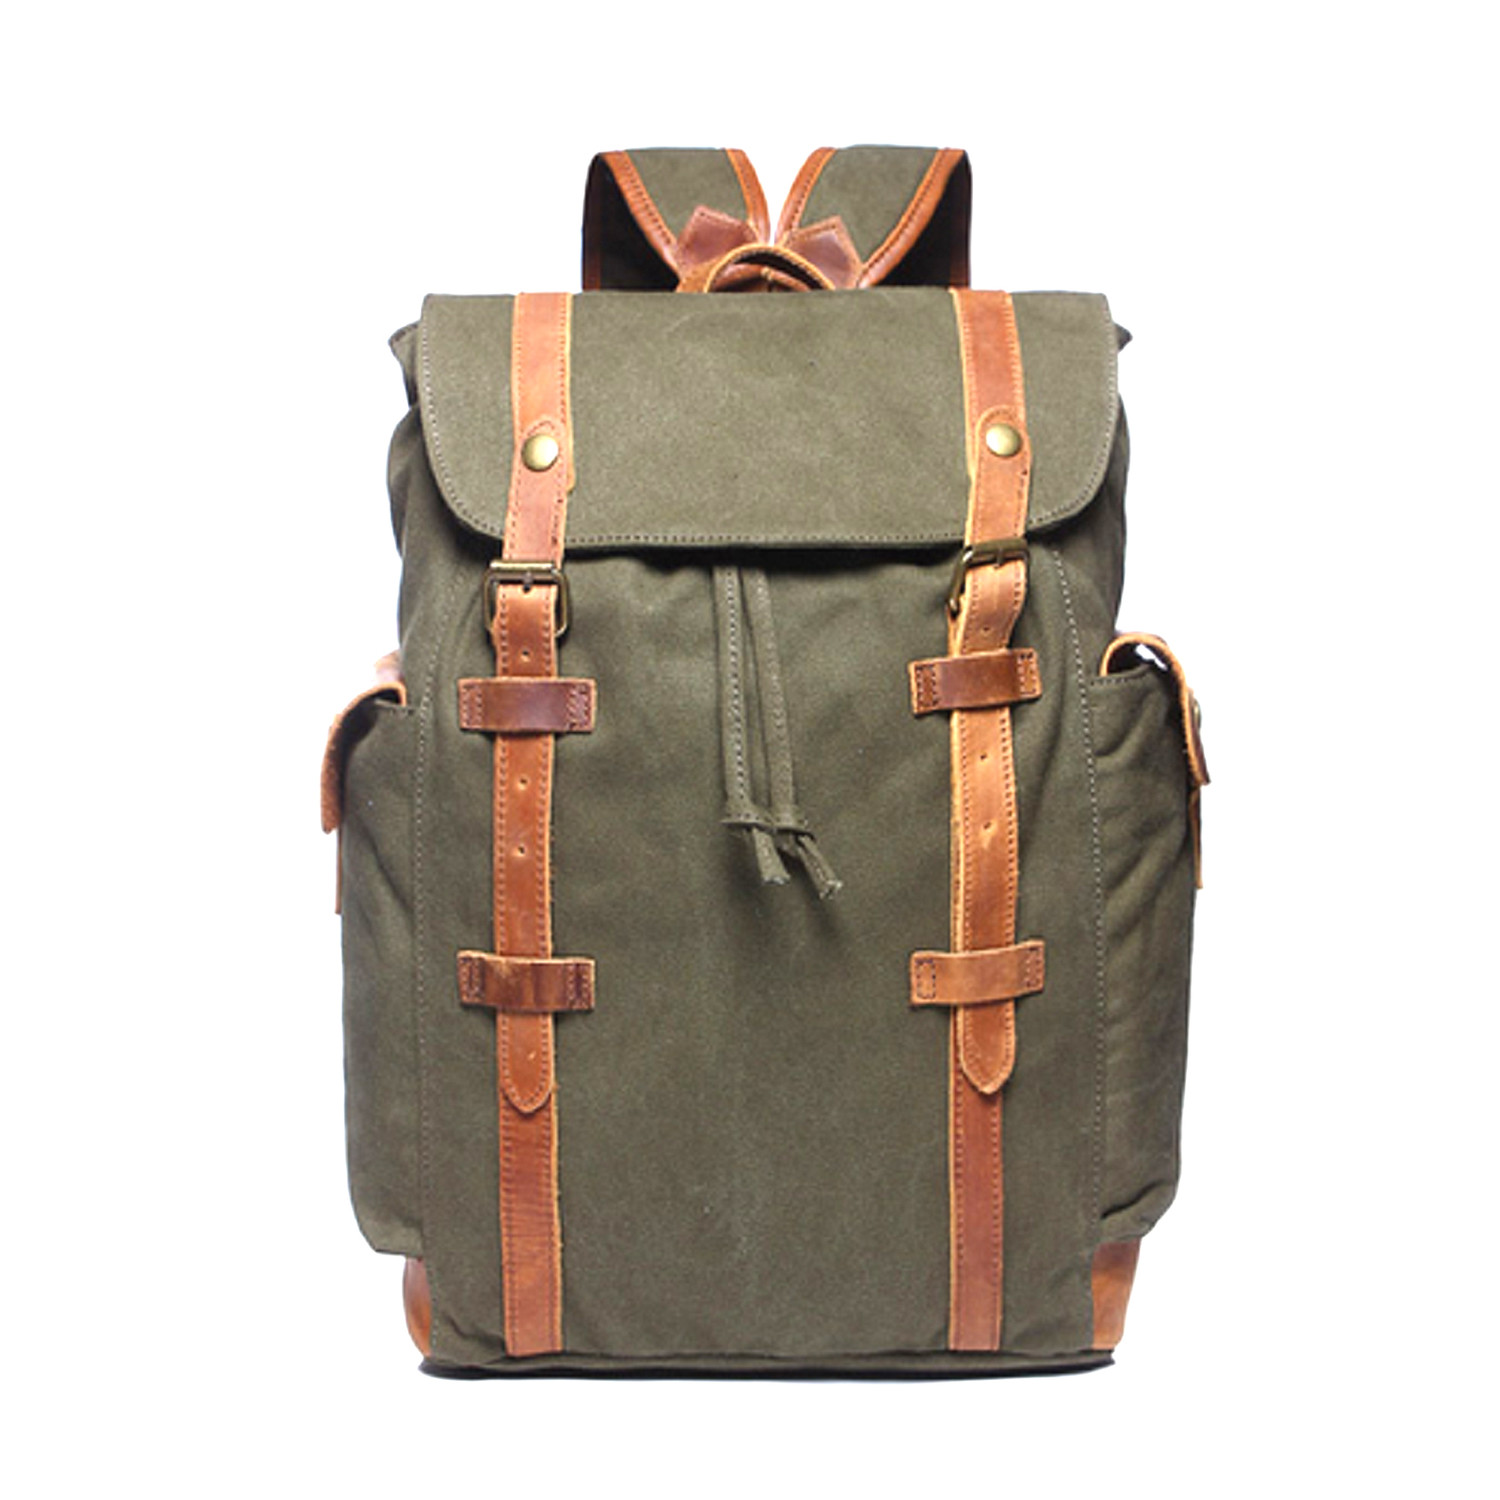 No. 746 Canvas Backpack (Navy) - OwnBag - Touch of Modern